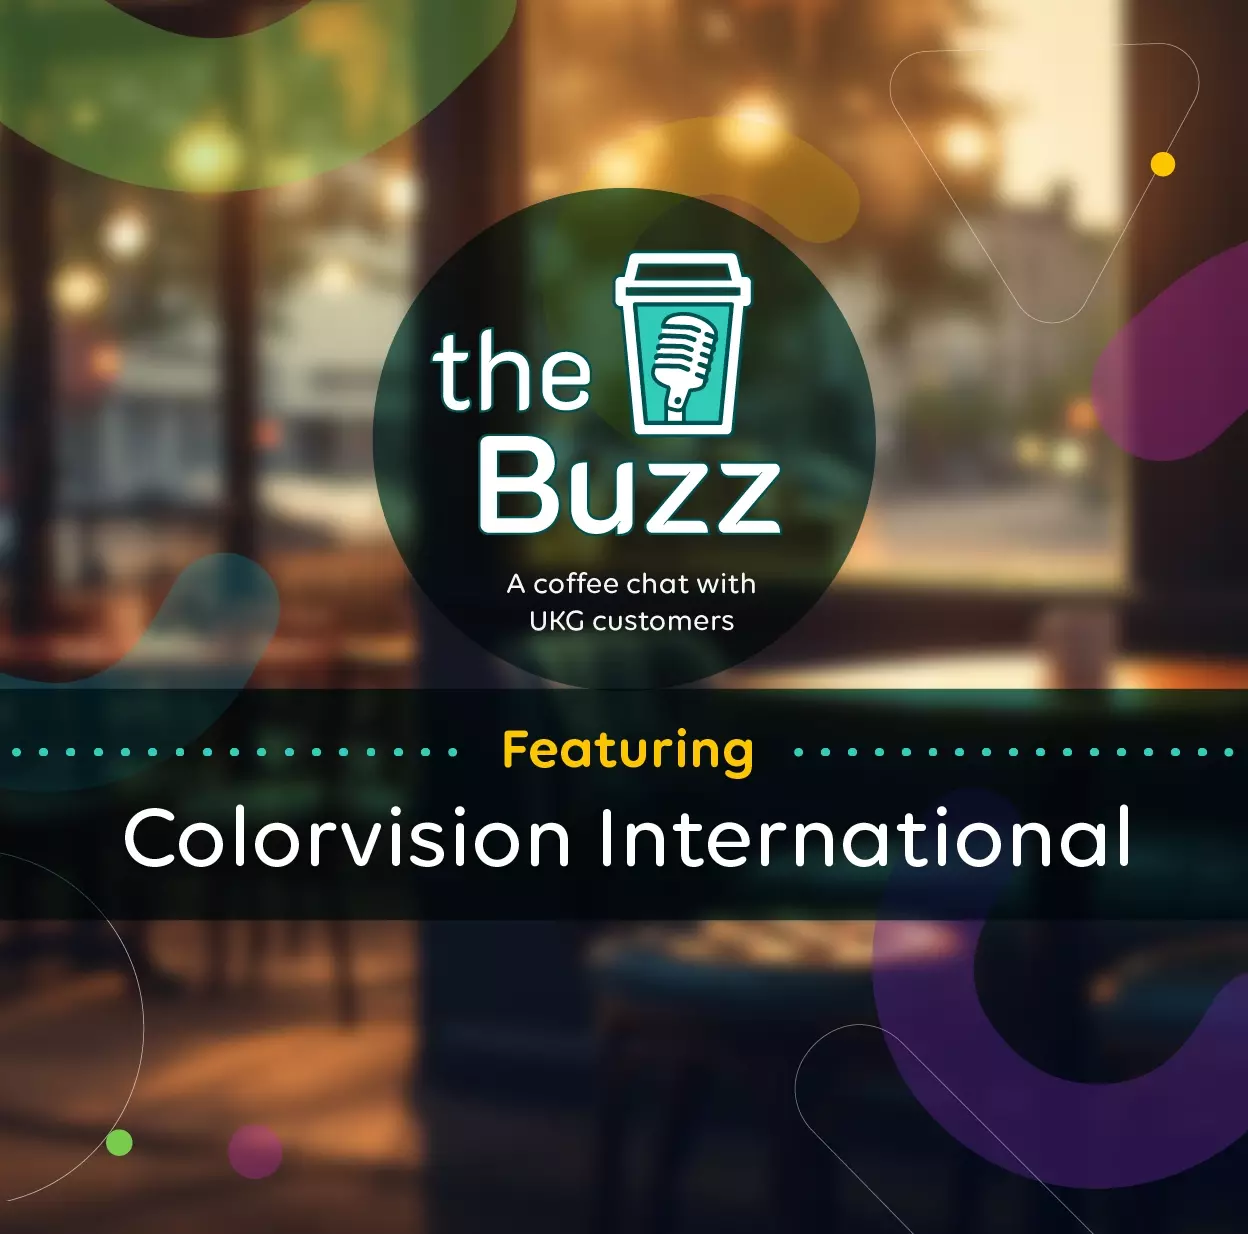 The Buzz: A Coffee Chat with UKG Customers Featuring Colorvision International